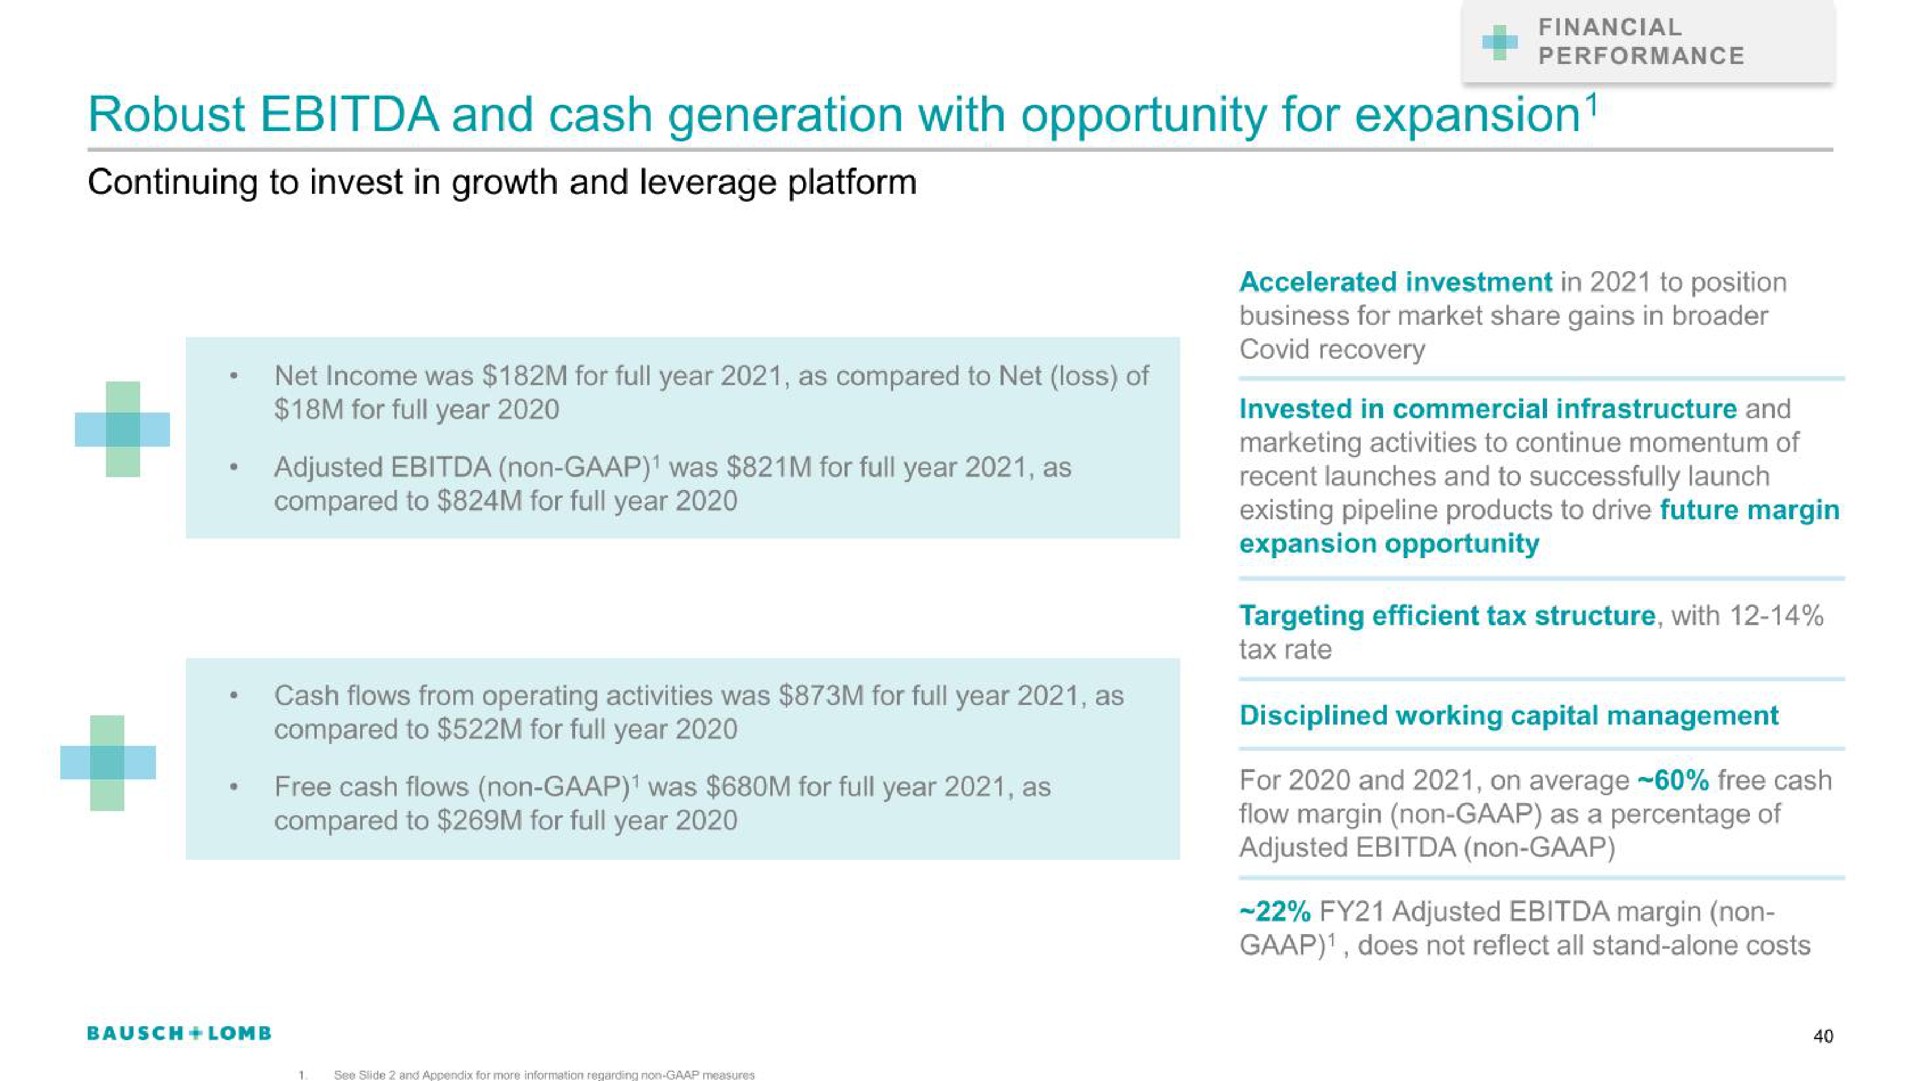 robust and cash generation with opportunity for expansion | Bausch+Lomb